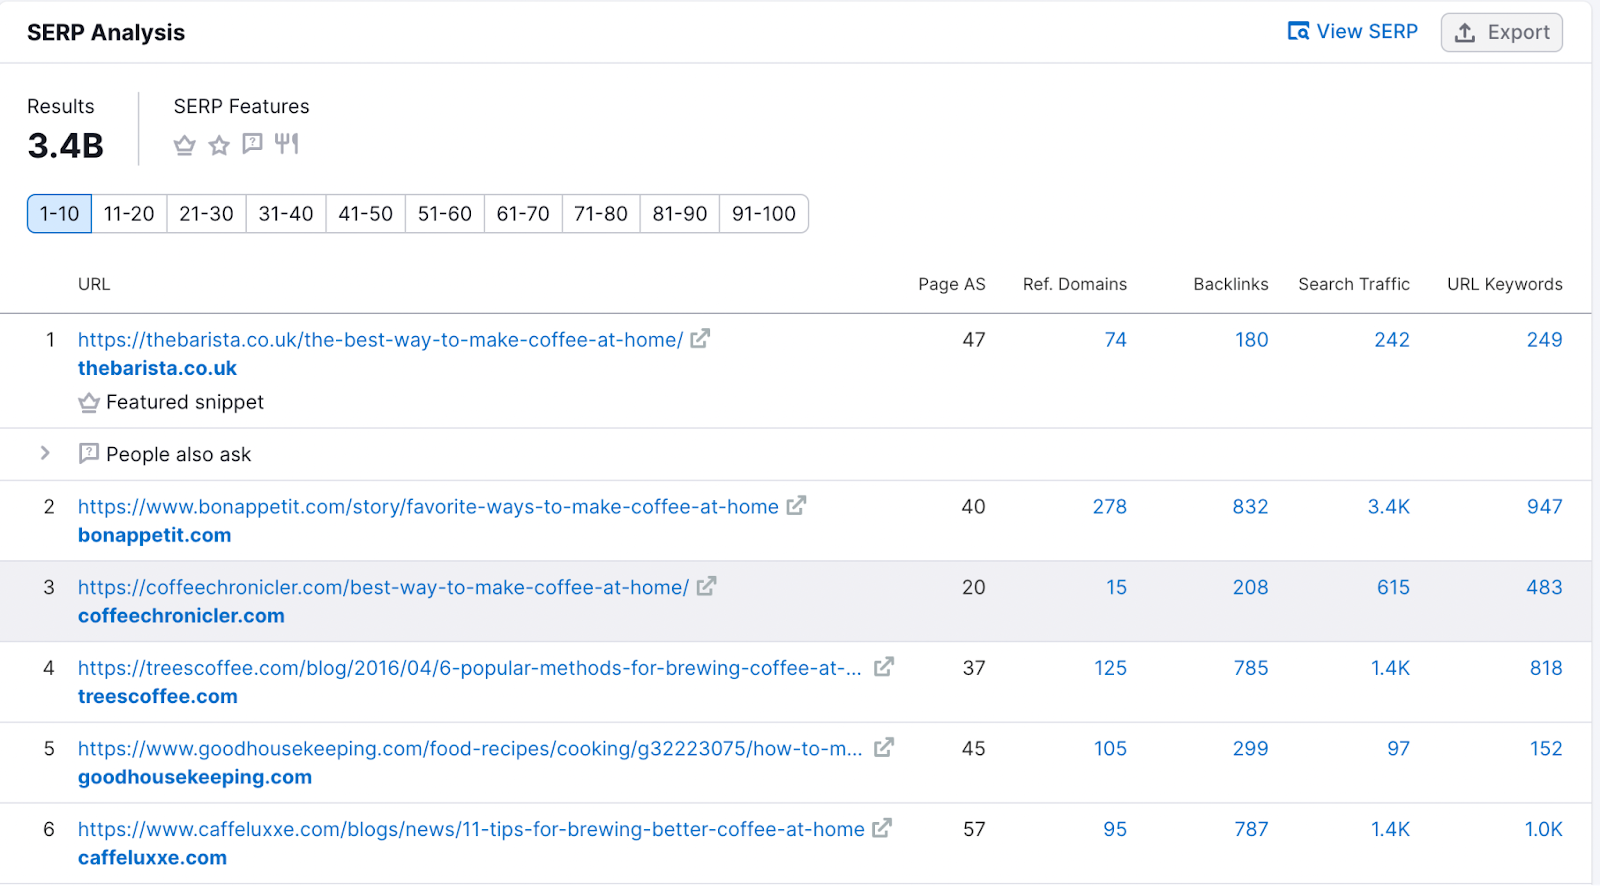 “SERP Analysis” section for "make coffee at home”